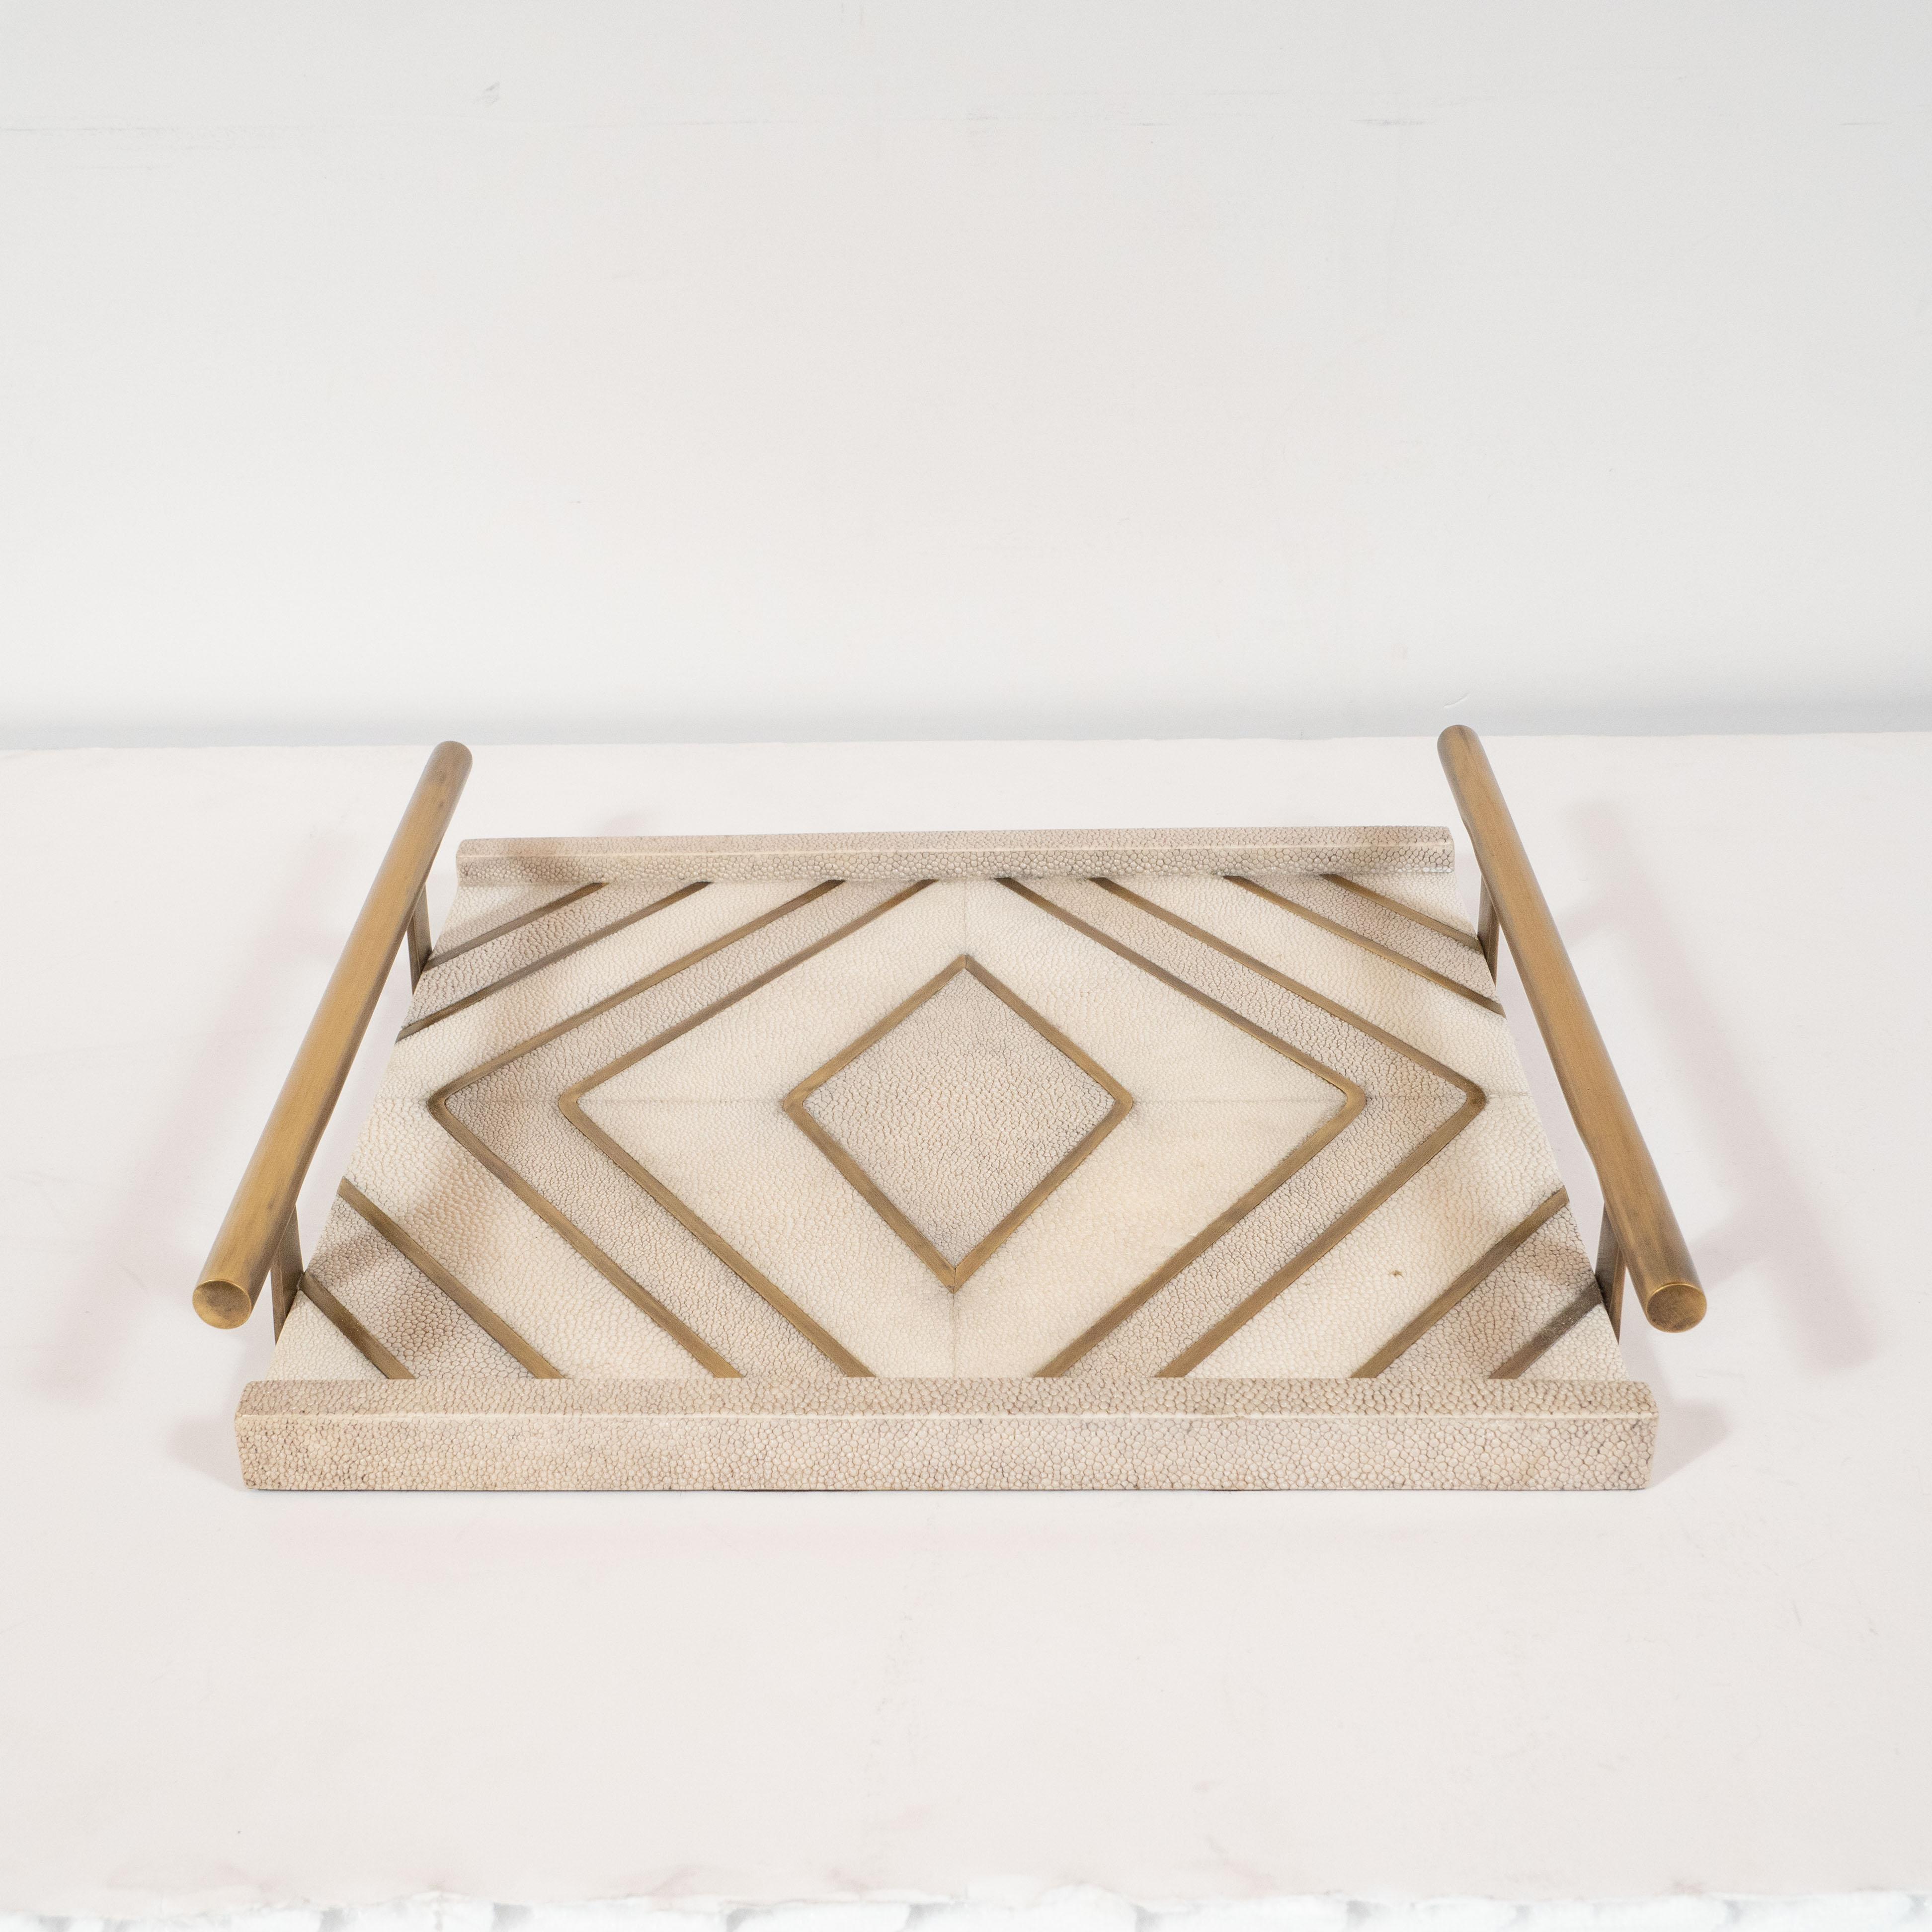 Designed in Paris by the celebrated atelier, Kifu, this refined tray features a wealth of concentric diamond forms embedded into the shagreen body of the tray. It features two raised sides (also in shagreen) and handles composed of rectilinear